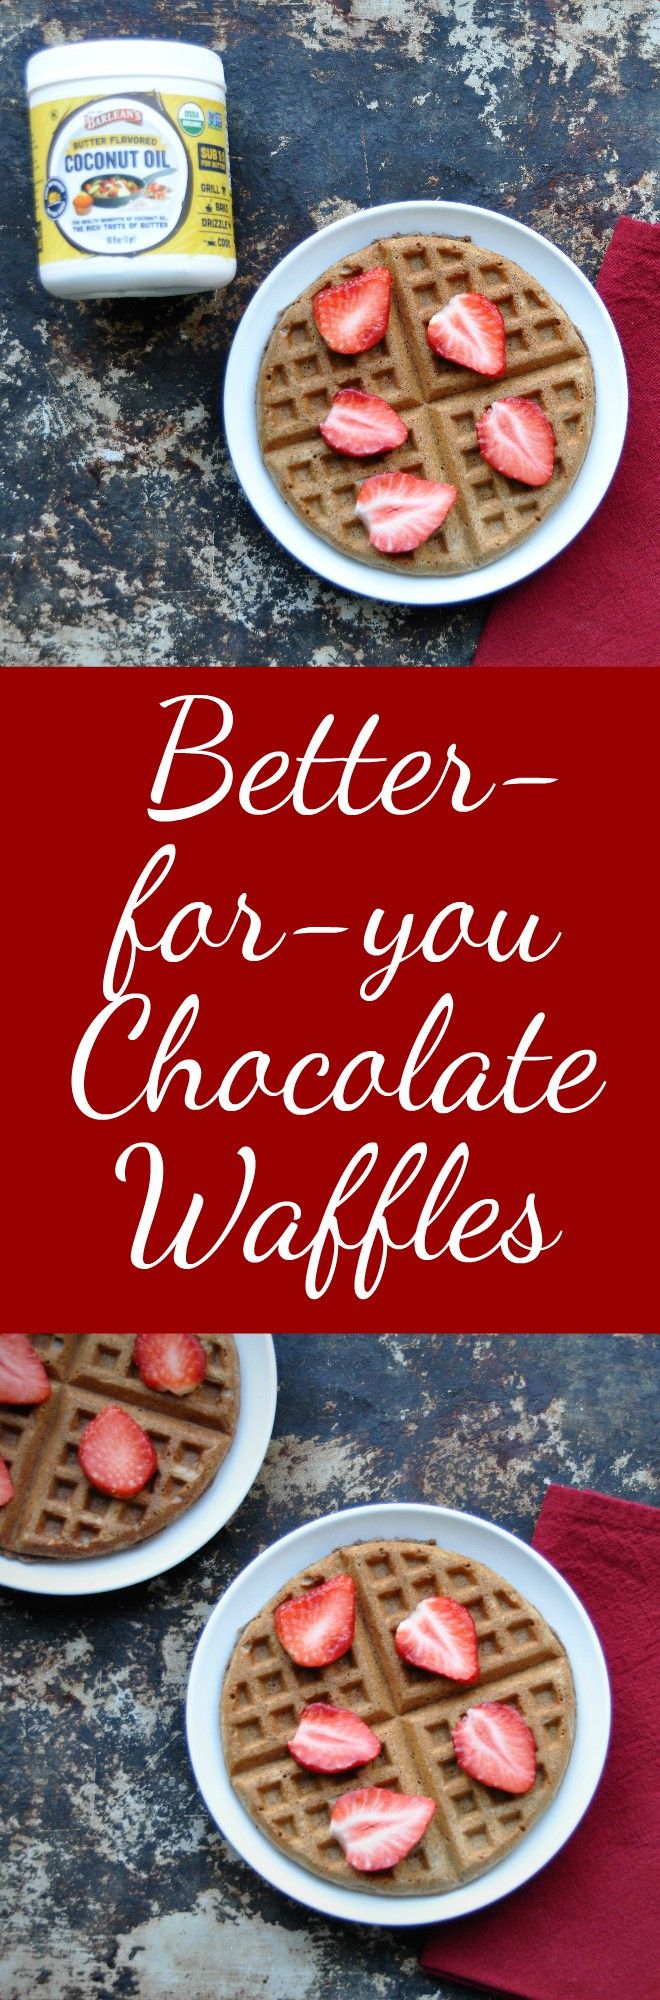 Better-for-you Chocolate Waffles